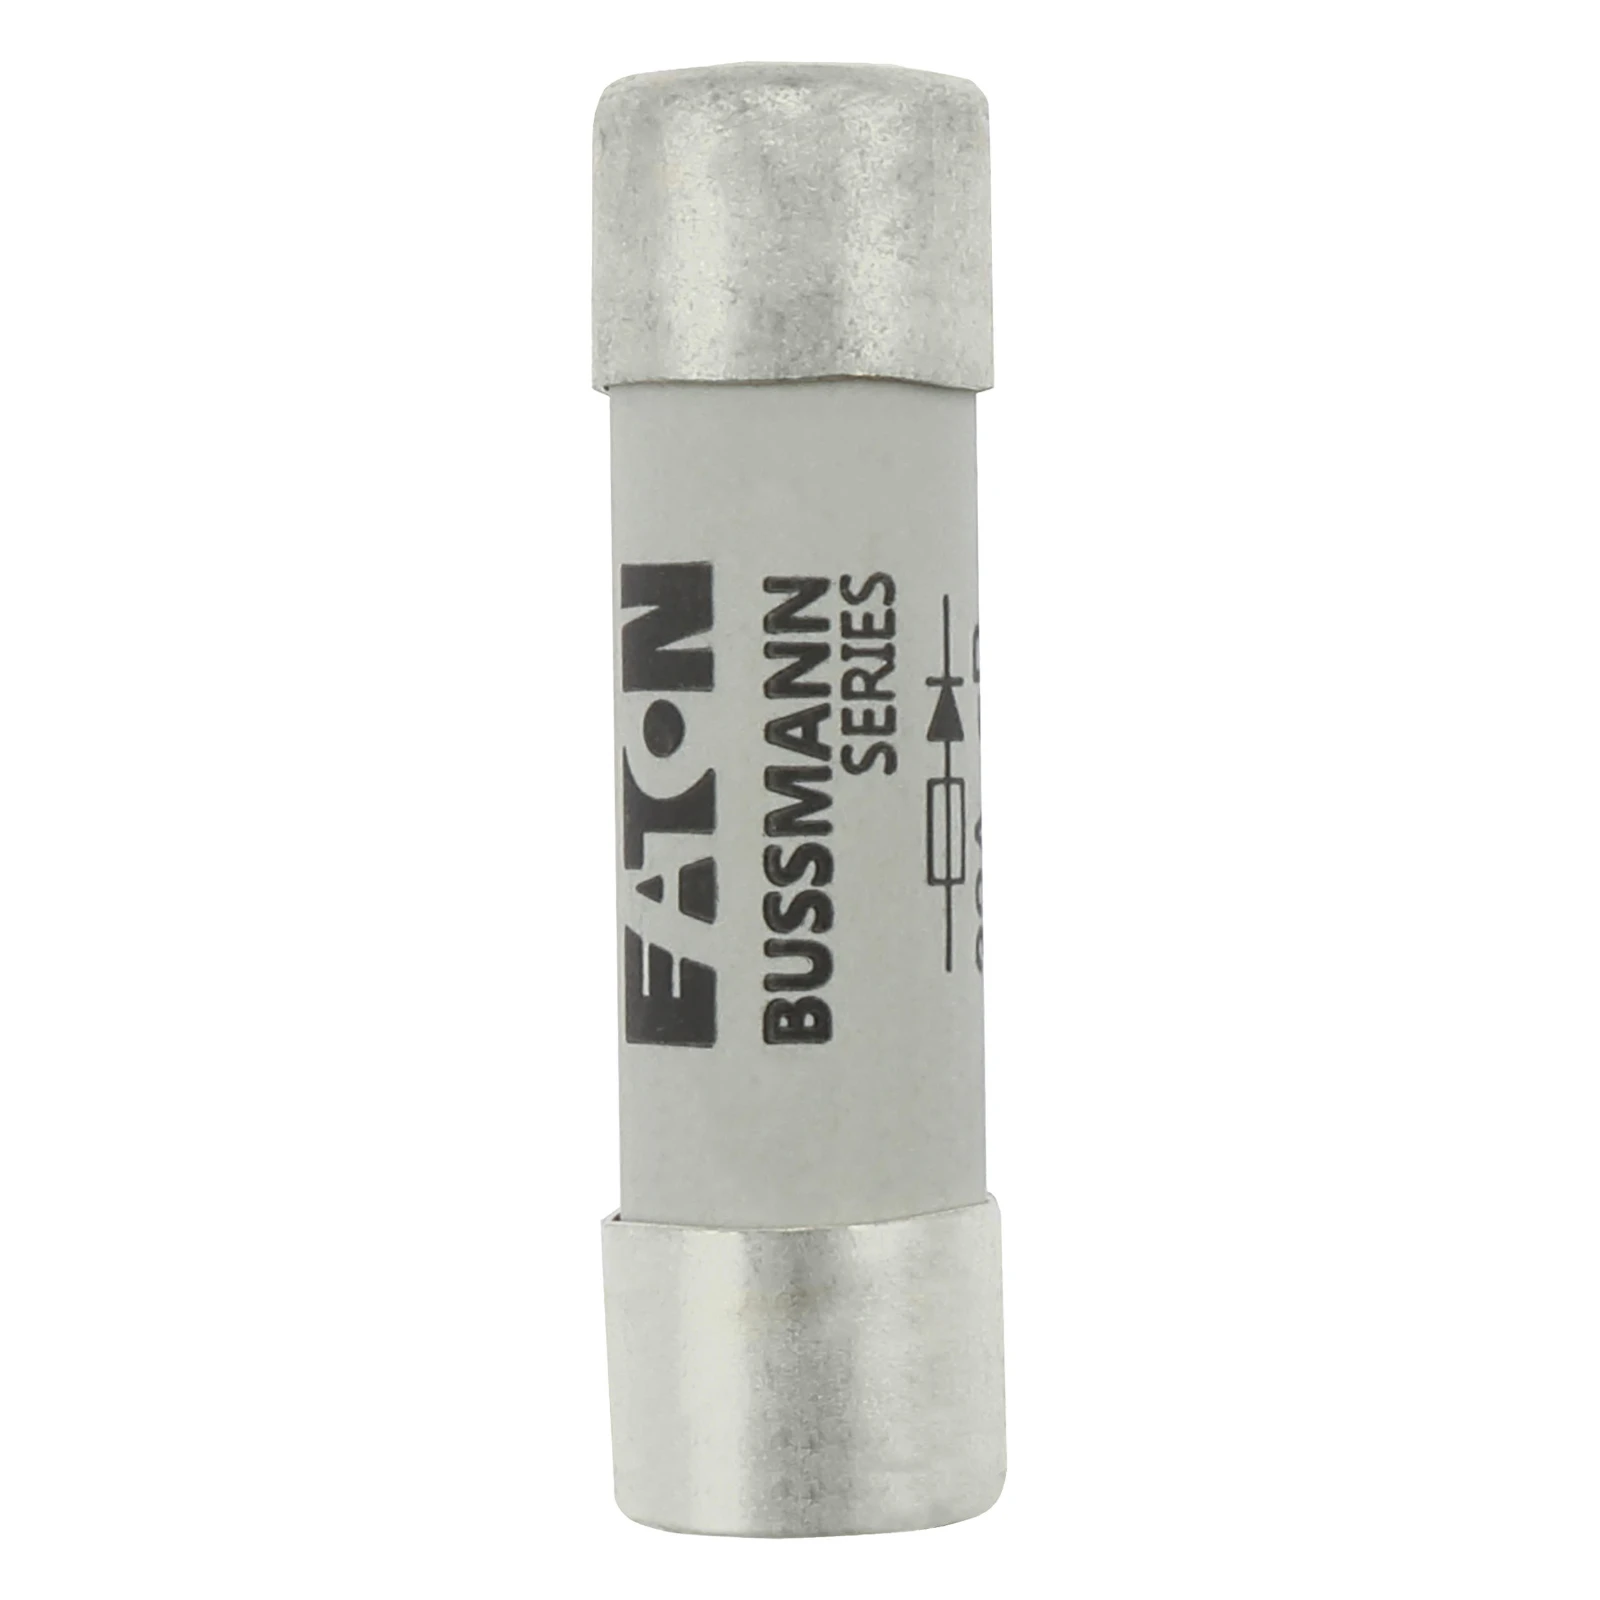 2545535 - Eaton Fuse 32A 690VAC gR 14x51 with Ind